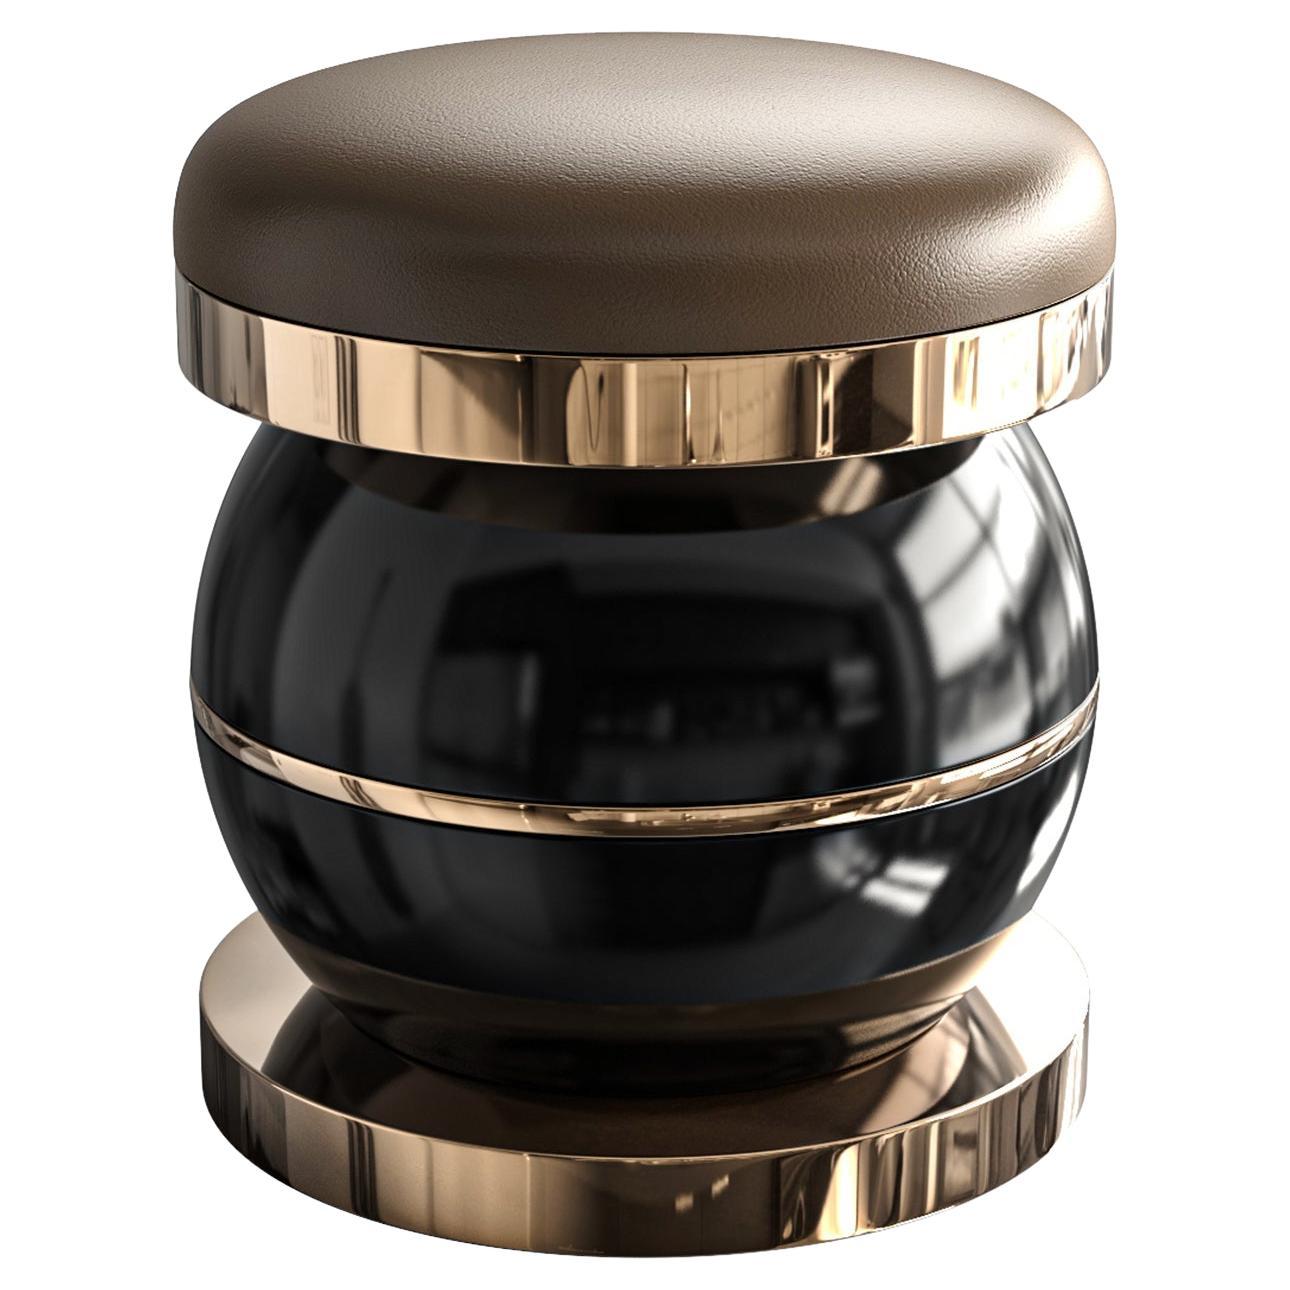 "Passione" Ottoman & Pouf with Bronze and Stainless Steel, Istanbul For Sale